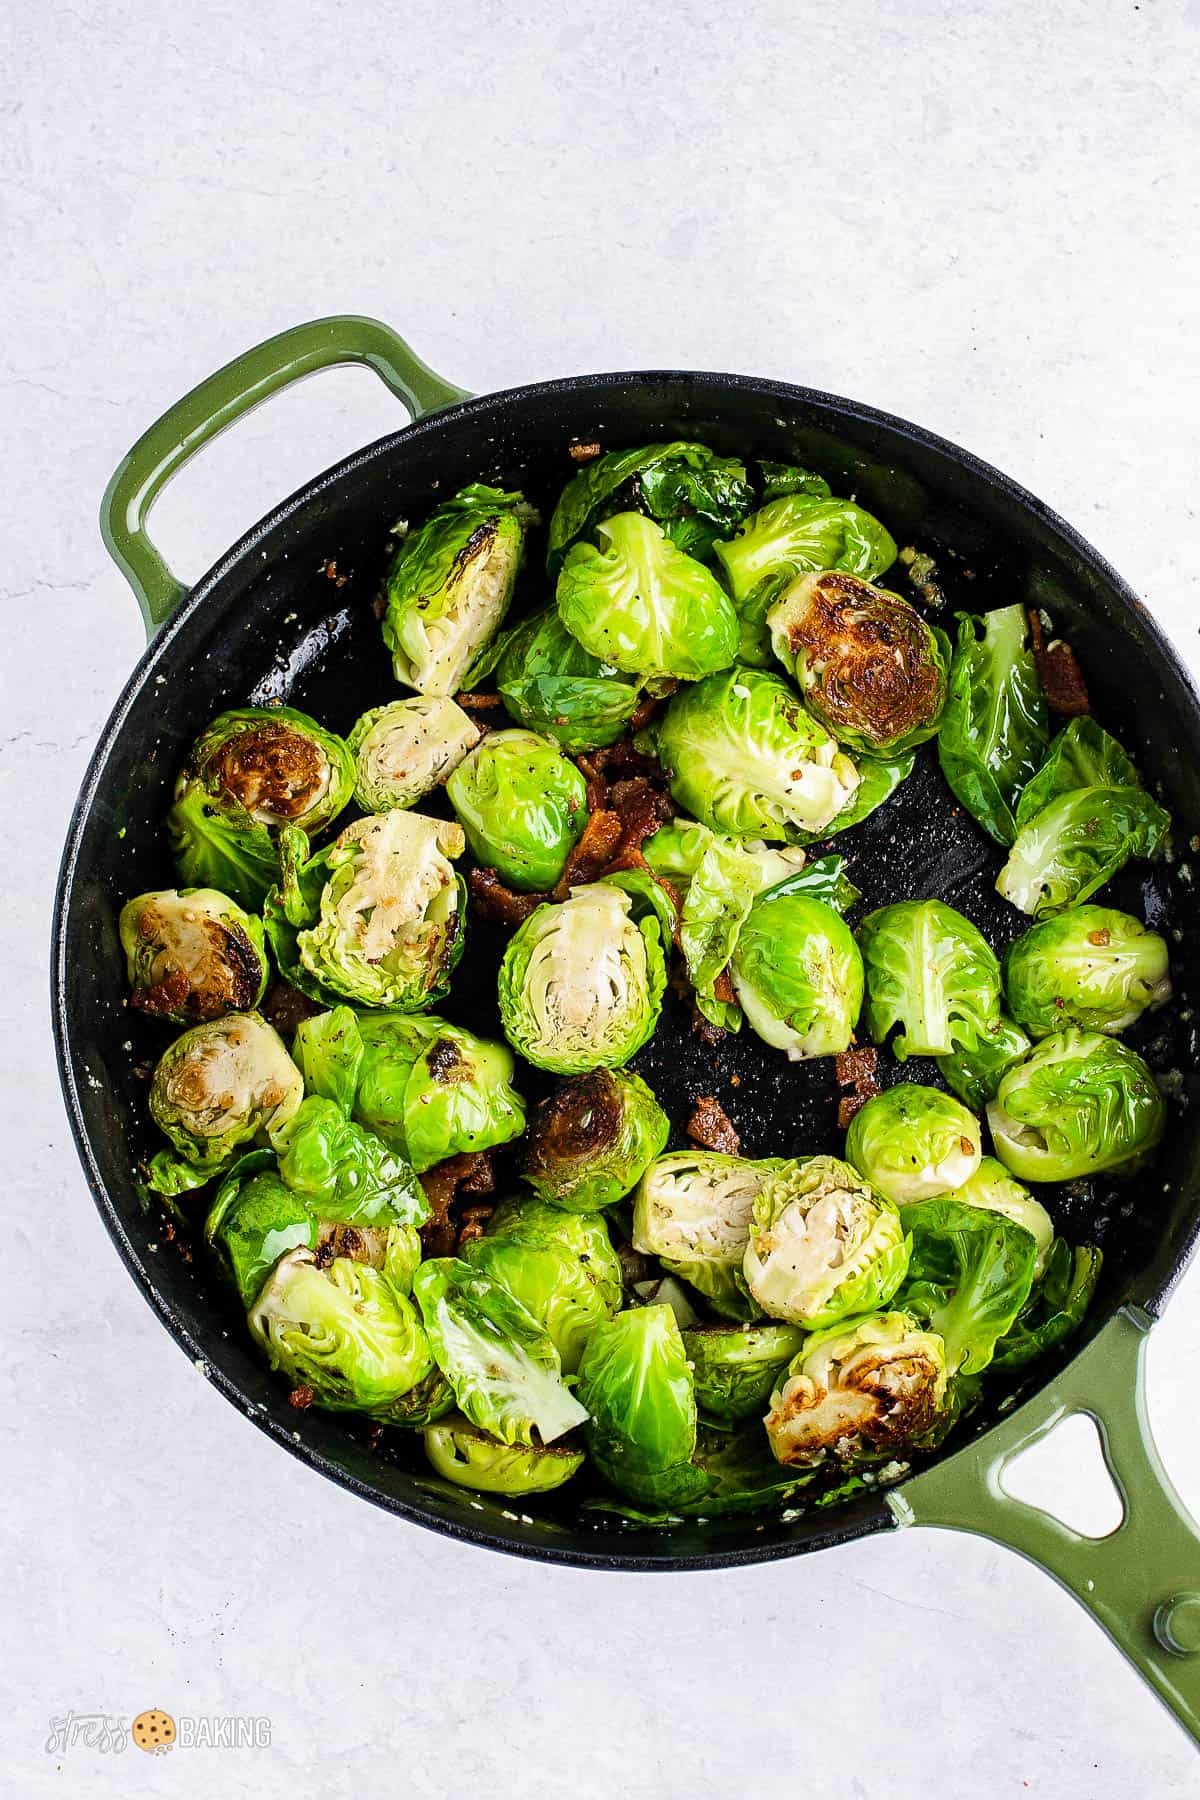 Halved brussels sprouts and bacon being browned in a skillet